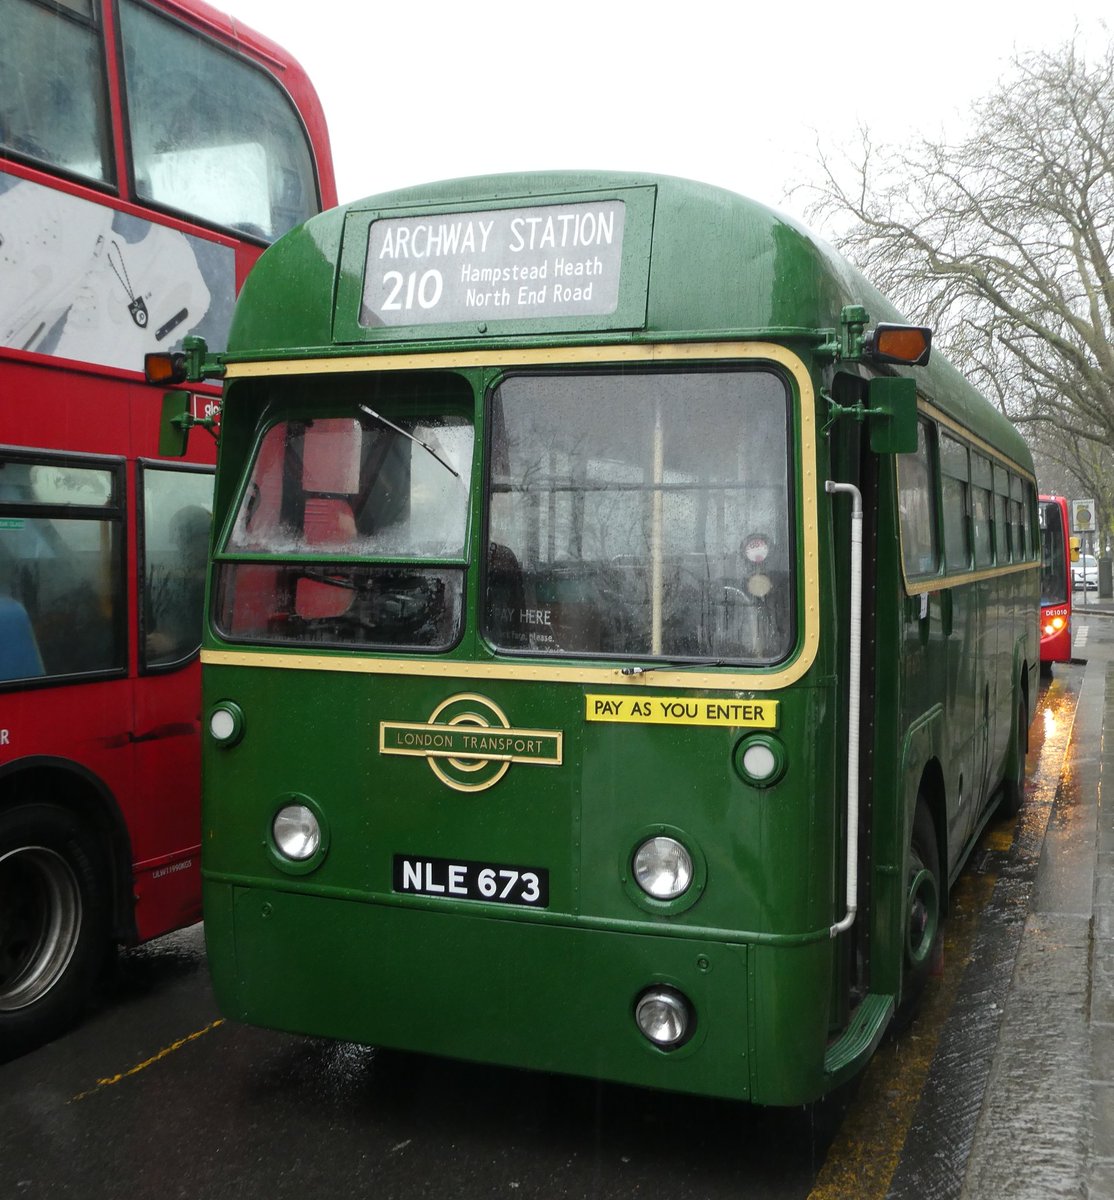 A few of the heritage buses out in North London today